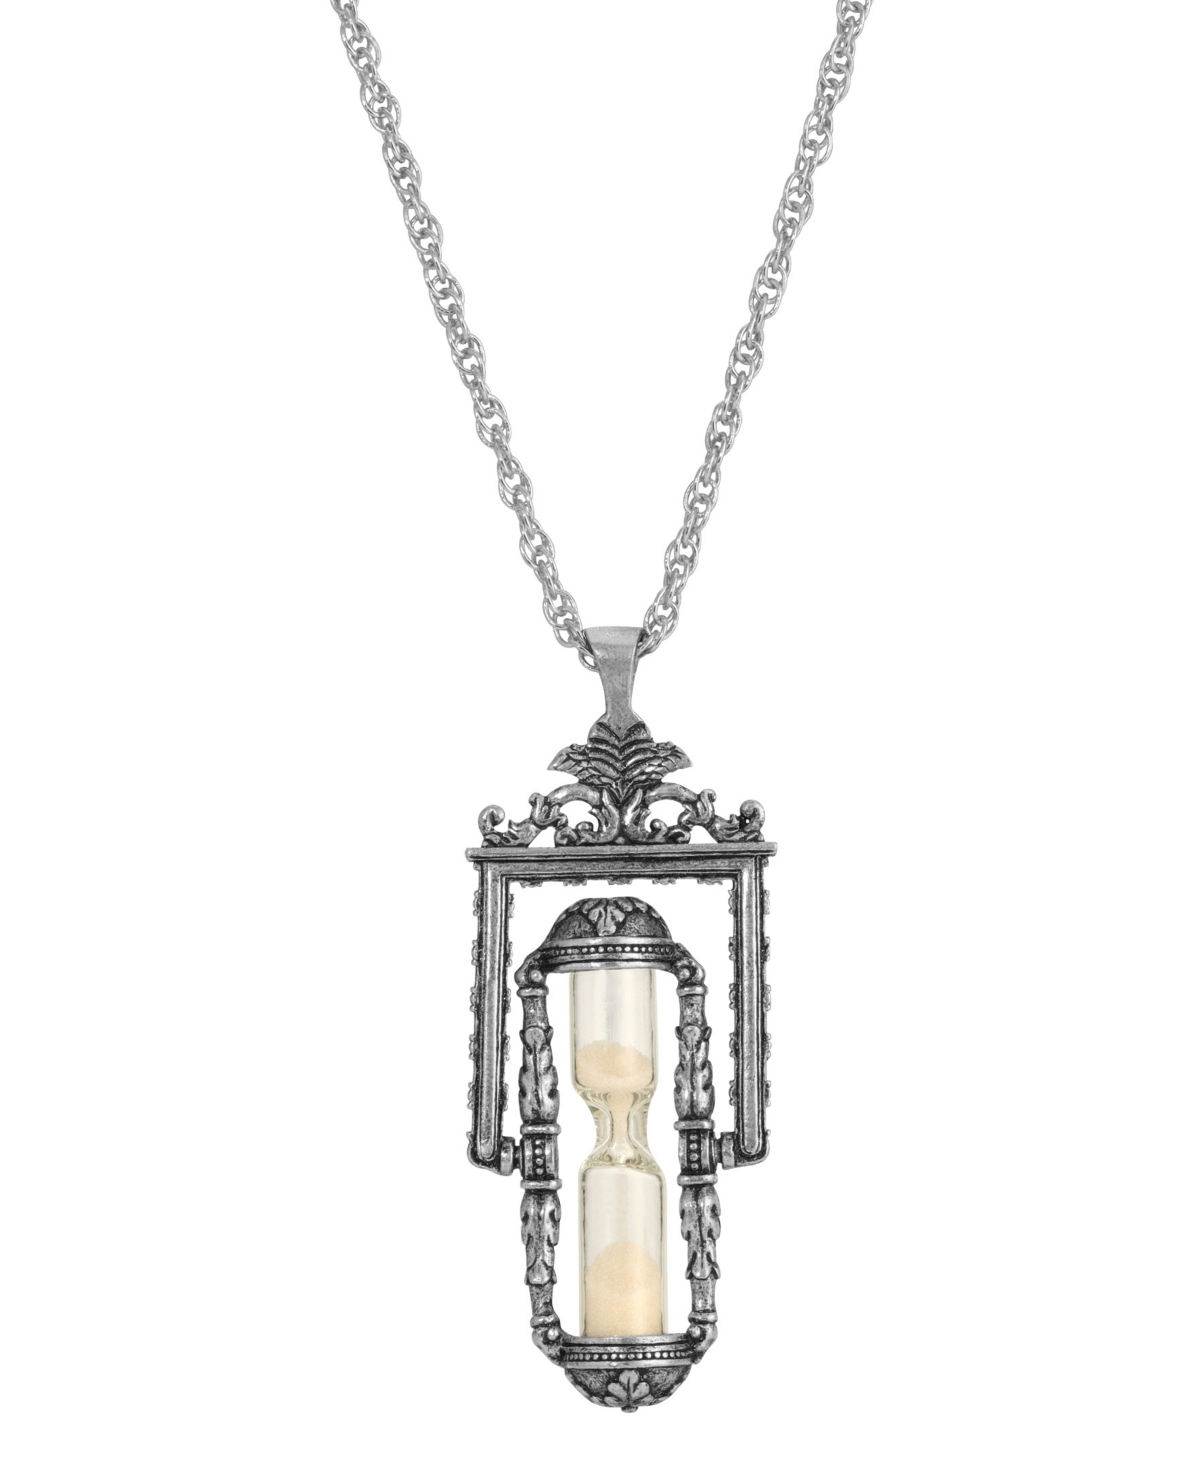 2028 Women's Hourglass Pendant Necklace In Gray